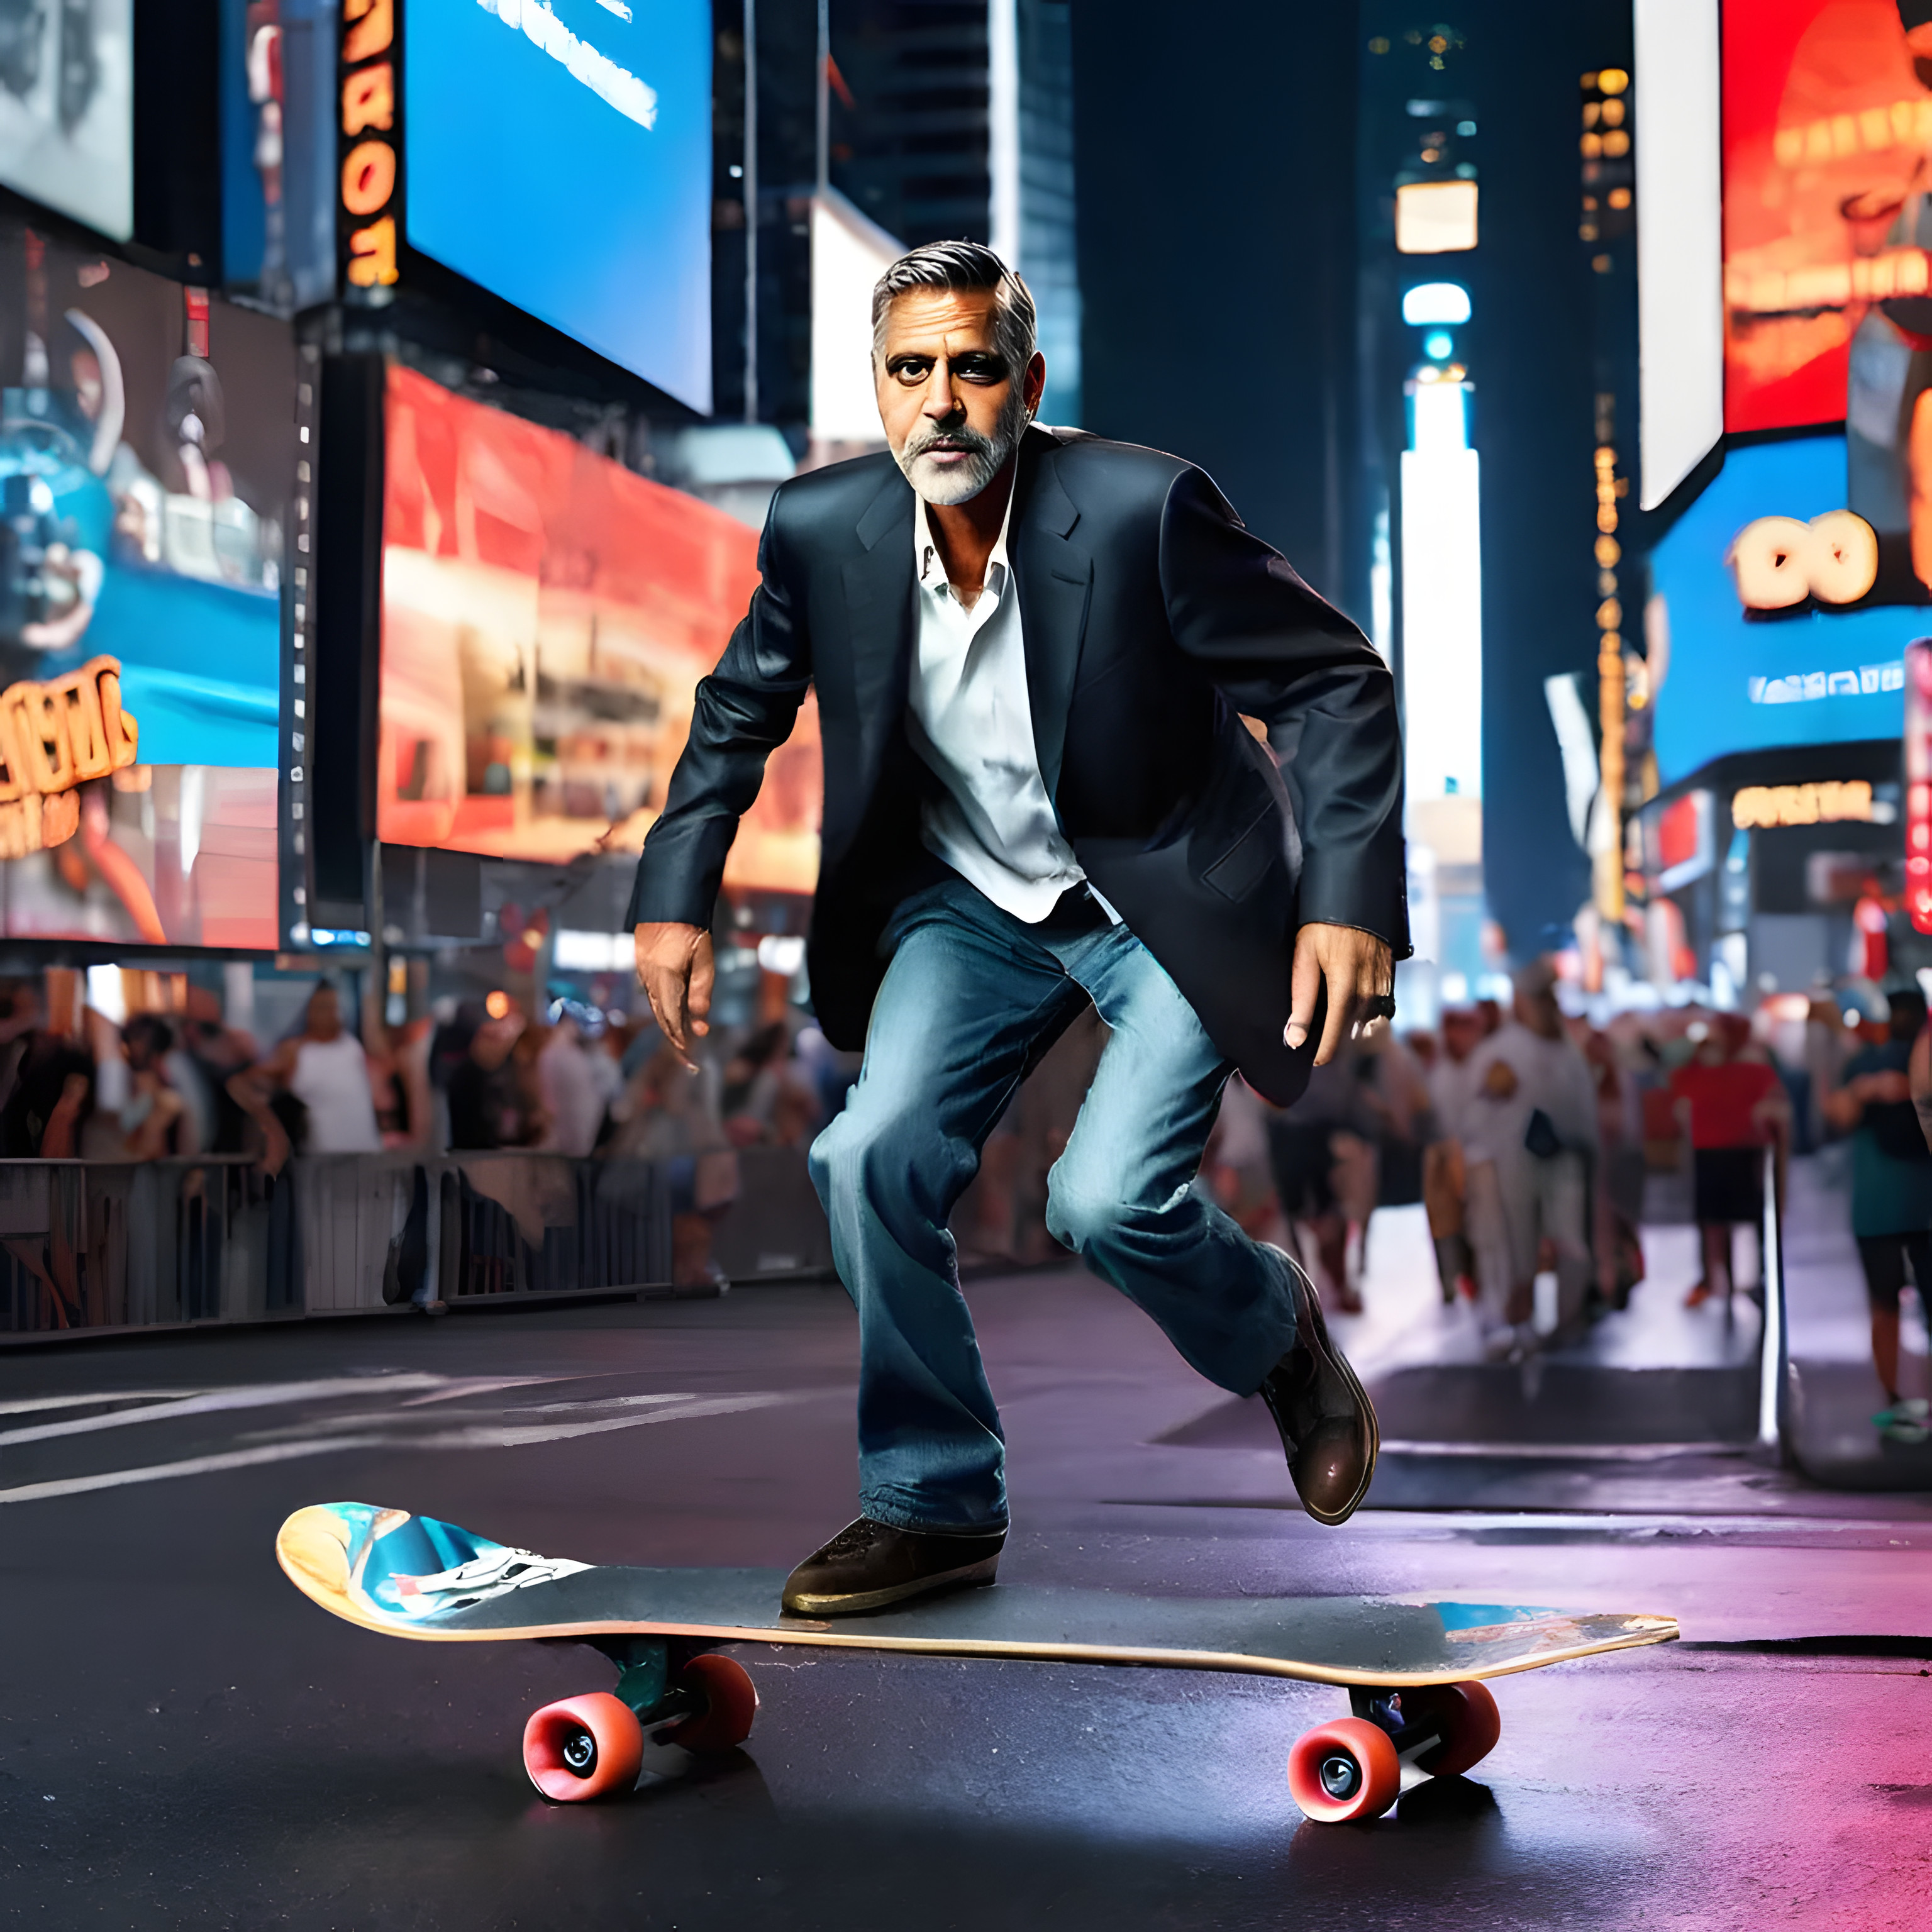 george_clooney_riding_a_longboard_at_new_your_times_square_at_night_high_res_details_incredibl...JPG